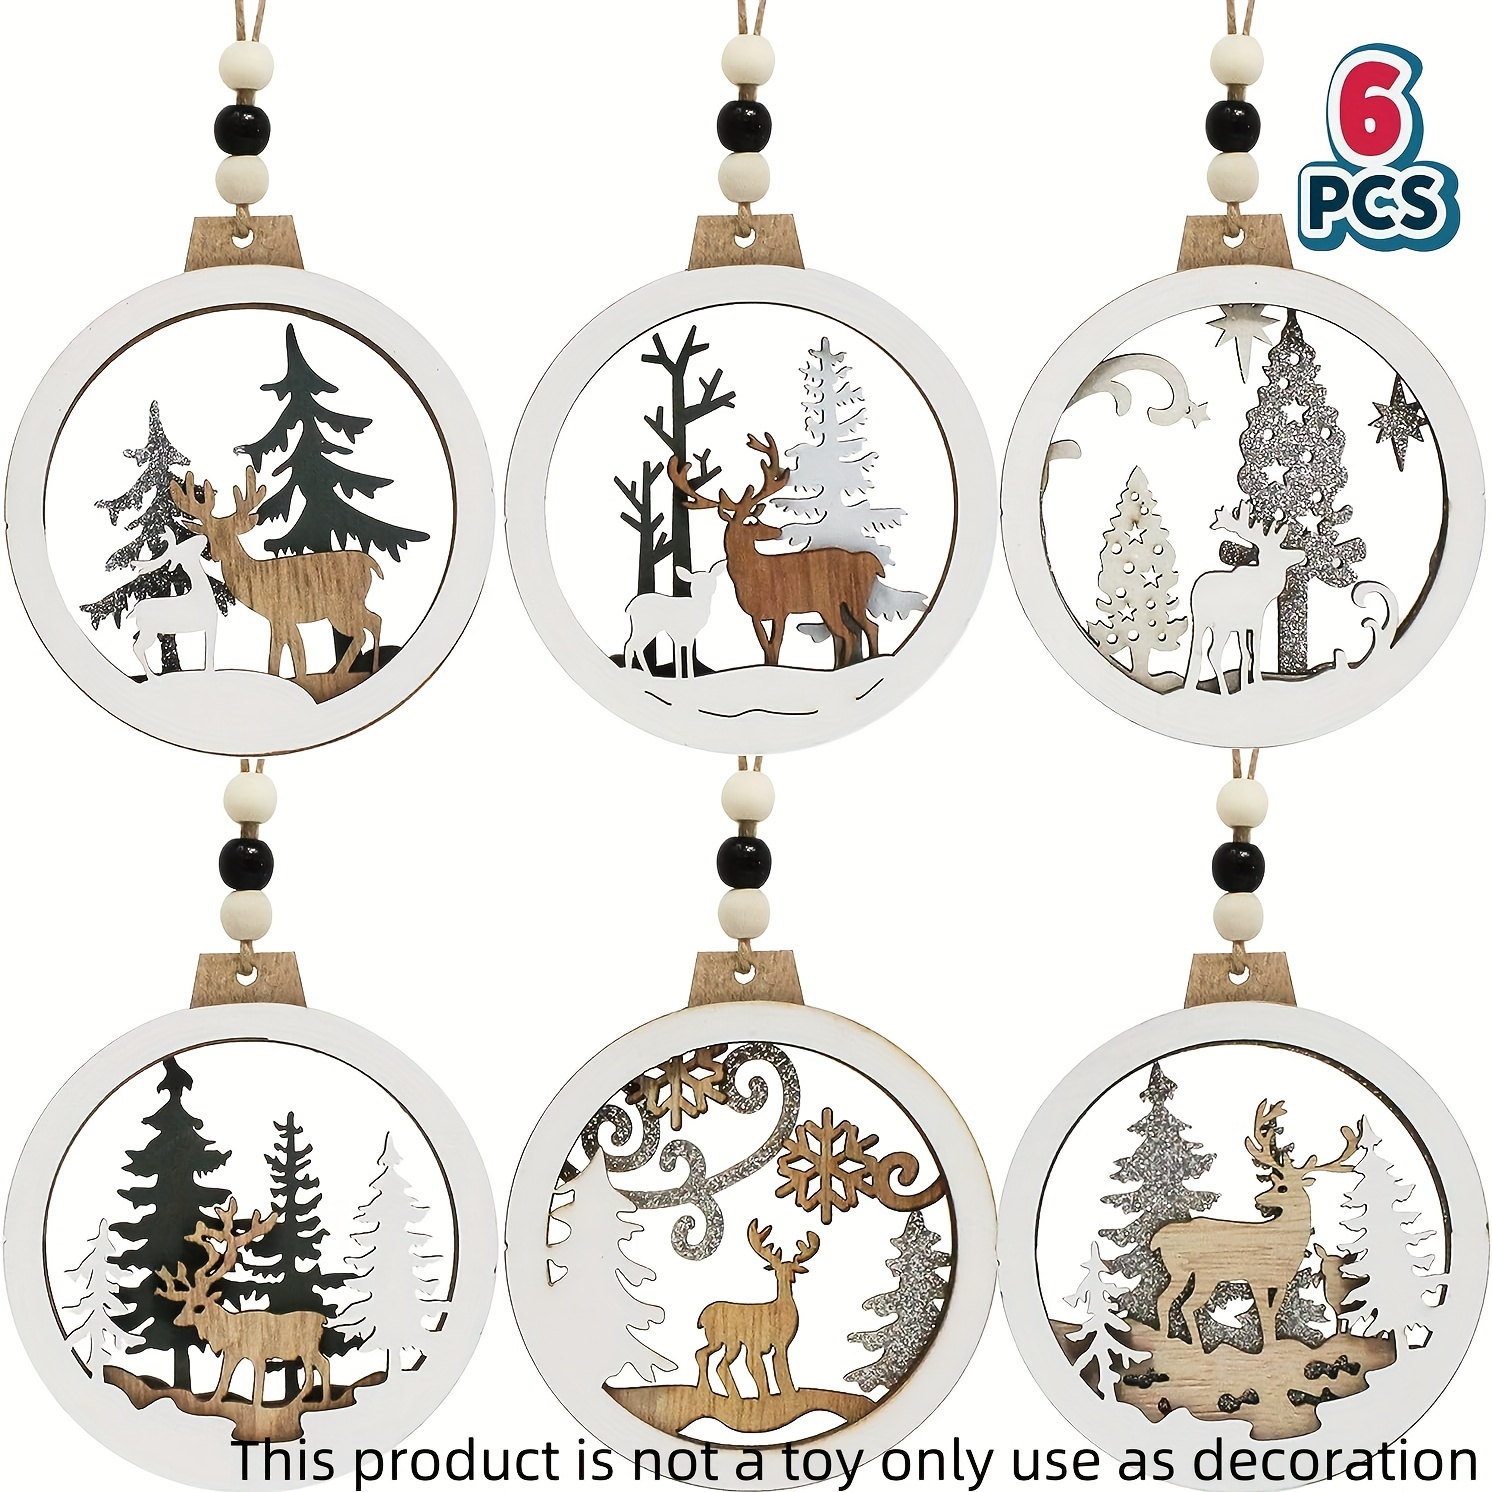  8 Pieces Christmas Wooden Ornaments Christmas Farmhouse  Ornaments Reindeer Hanging Decorations Xmas Tree Ornaments Rustic 3D Round  Hollow Laser Cutting Wood Ornament for Christmas Holiday Decor : Home &  Kitchen